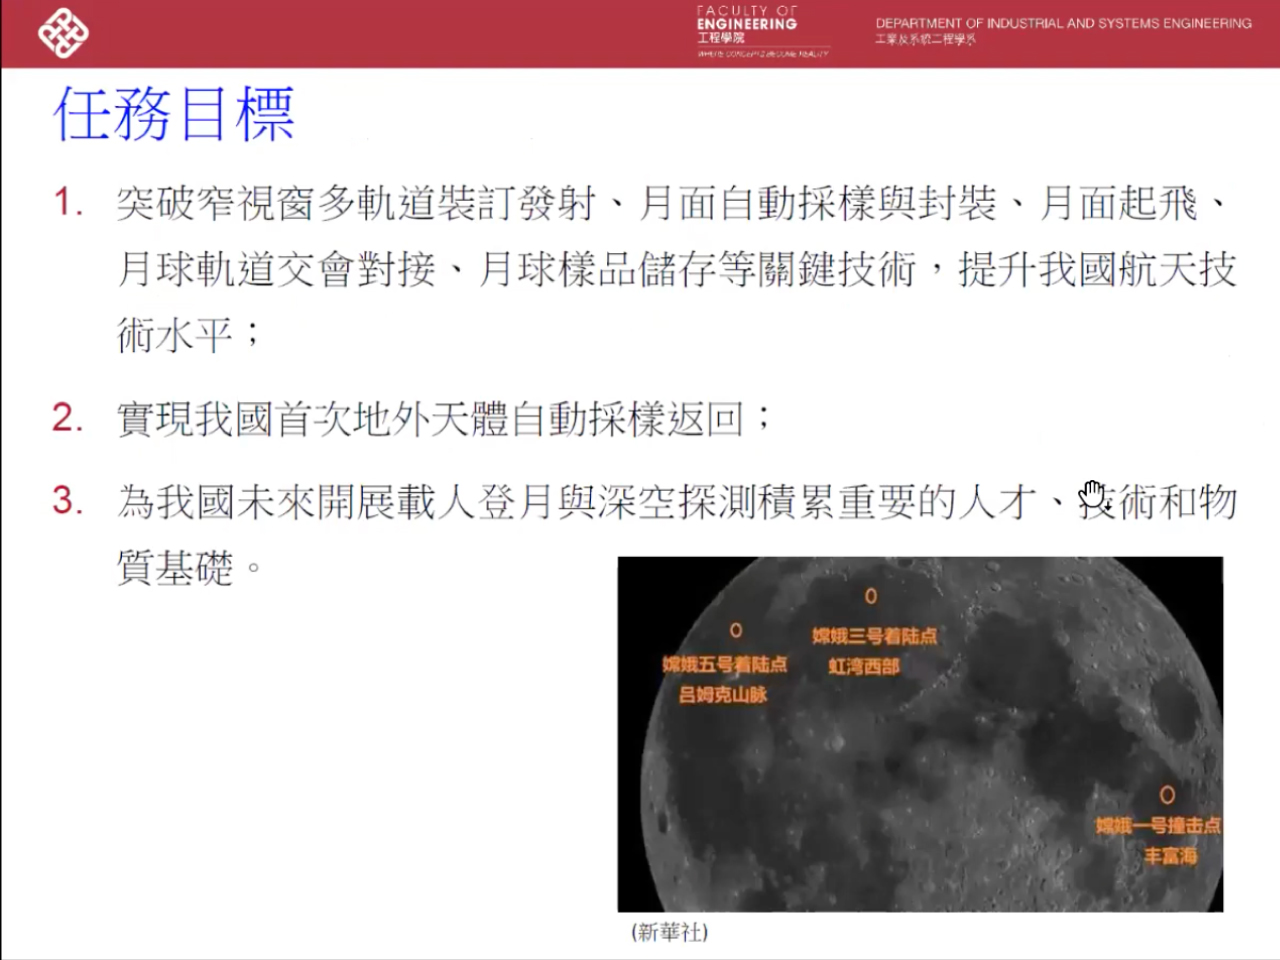 Challenges in Developing the Chang’e 5 “Surface Sampling and Packing System